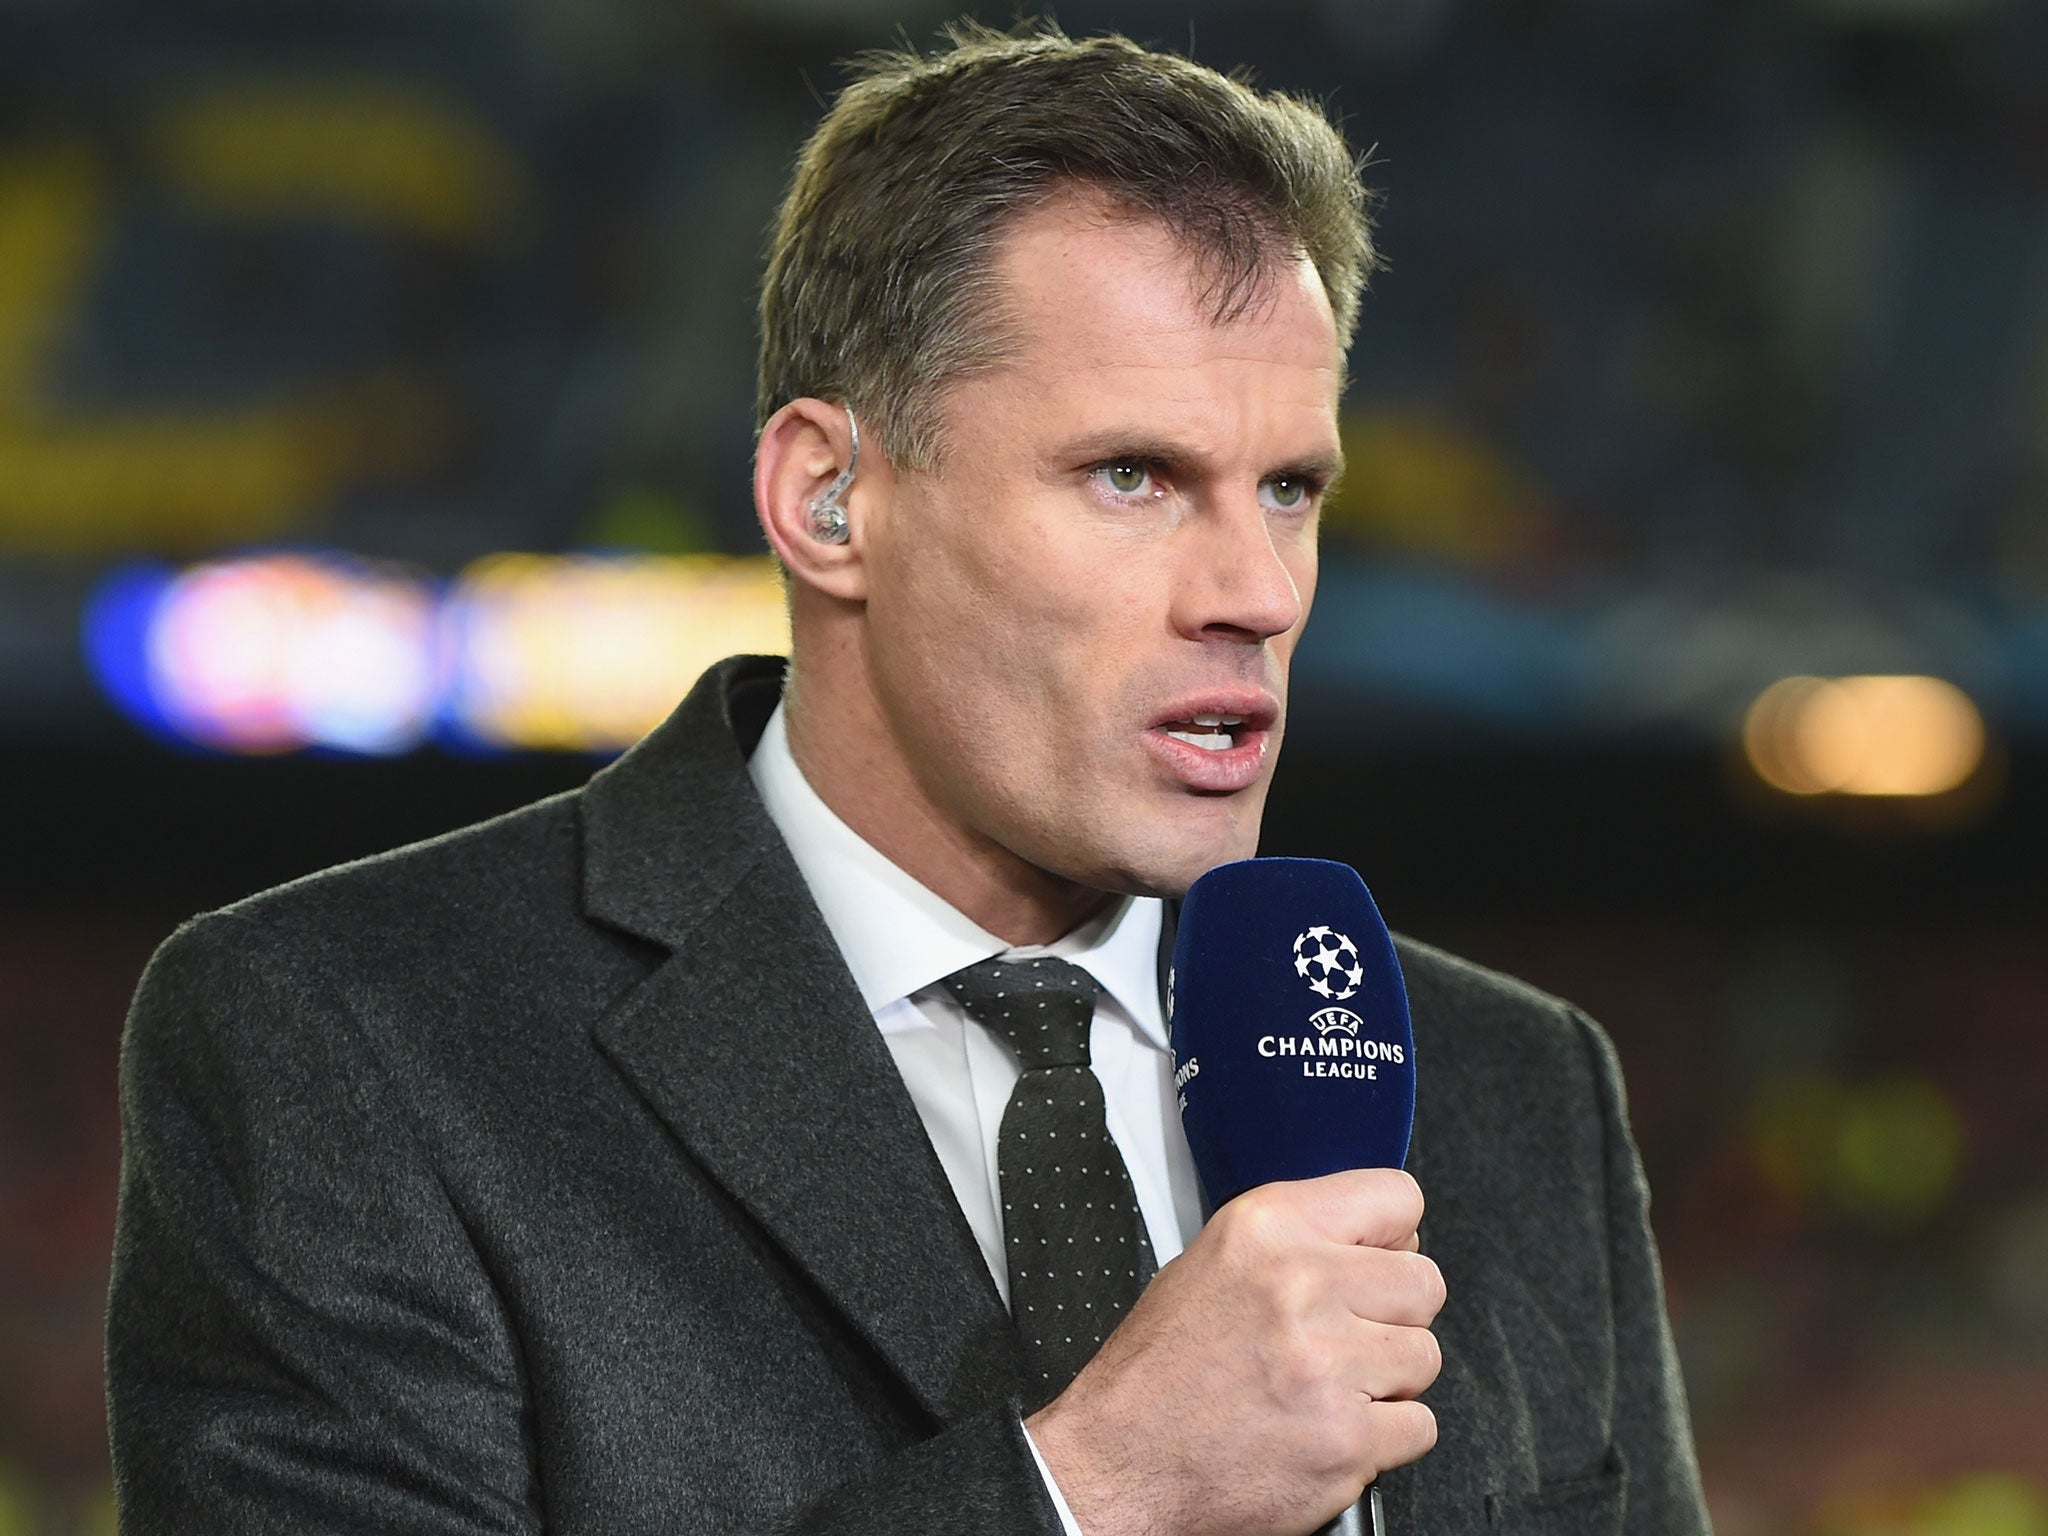 Jamie Carragher while working as a pundit this season